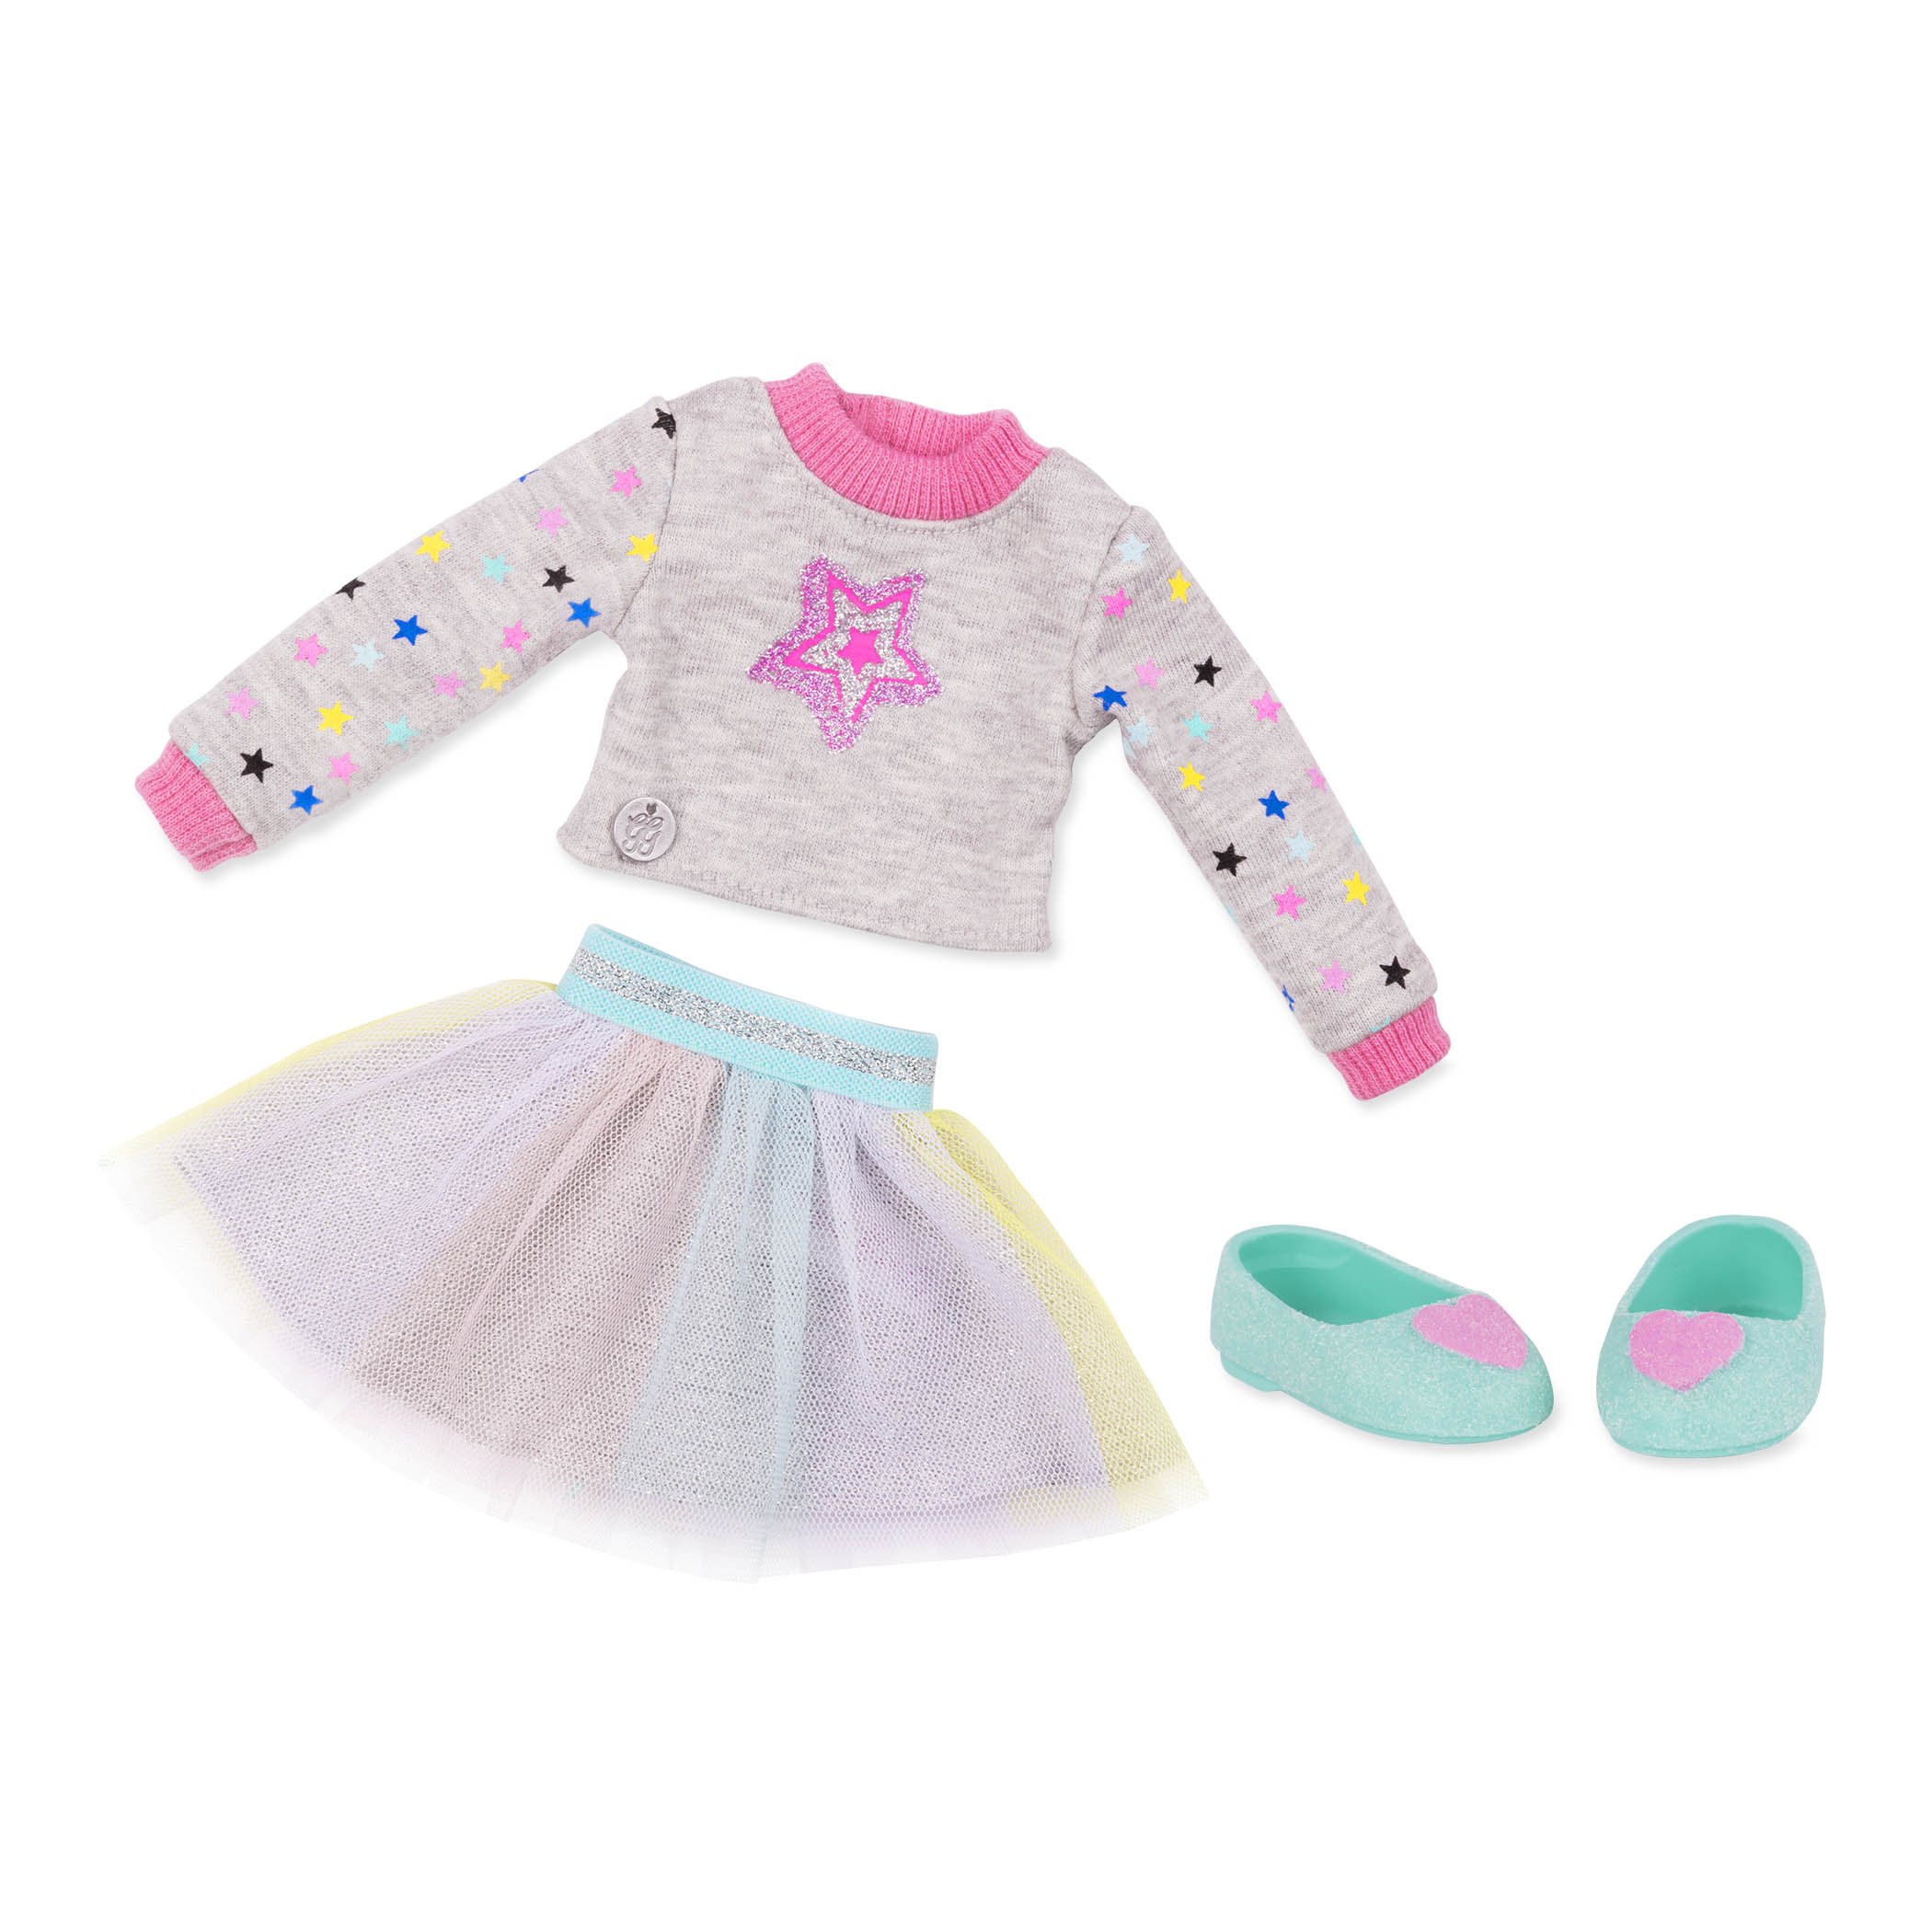 Glitter Girls - Shine Bright Outfit -14-inch Doll Clothes - Toys, Clothes & Accessories For Girls 3-Year-Old & Up